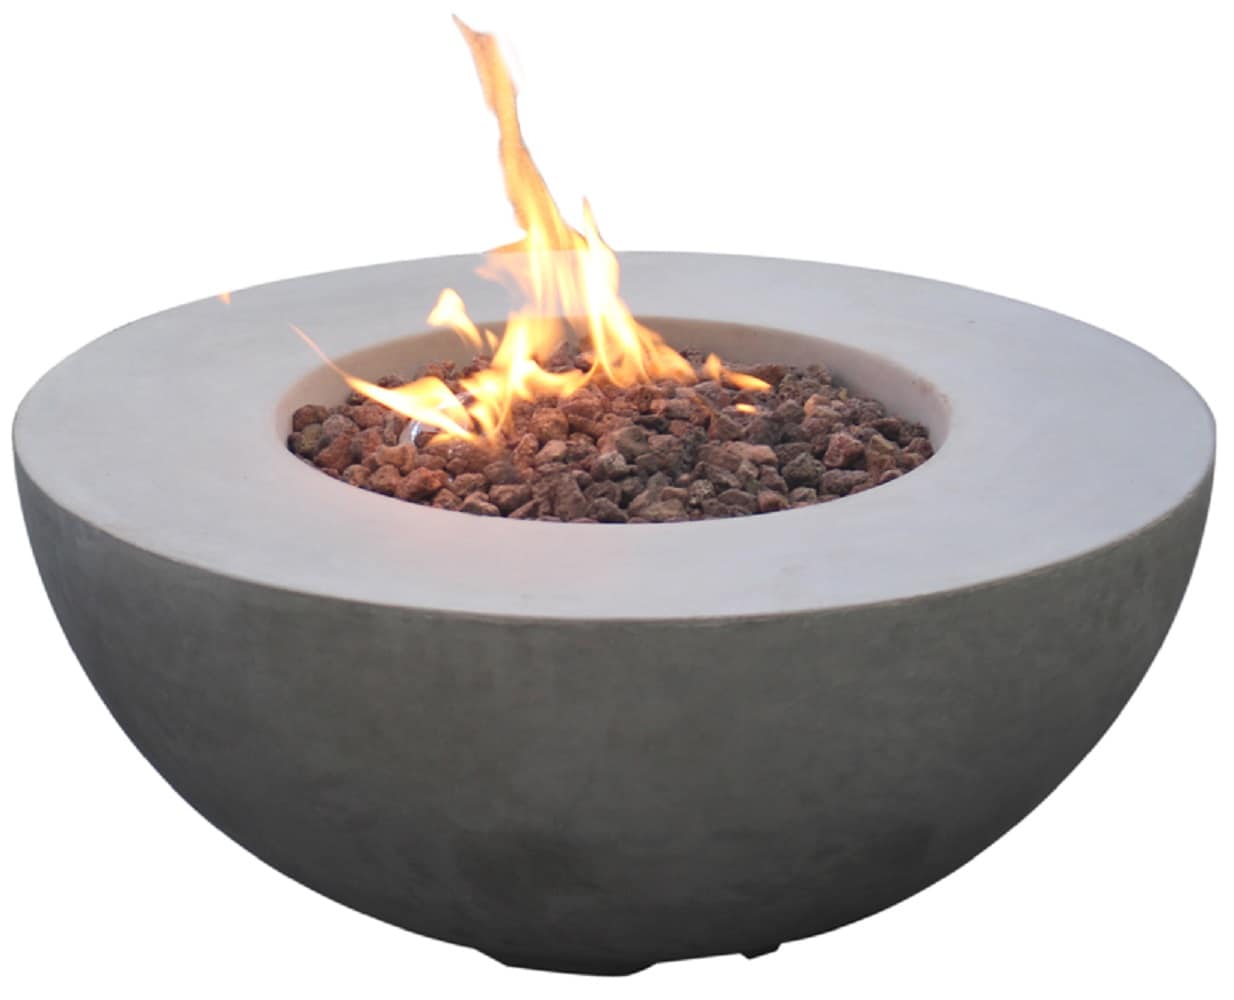 Gas Fire Pits Department At, Fire Pit Made From Propane Tank